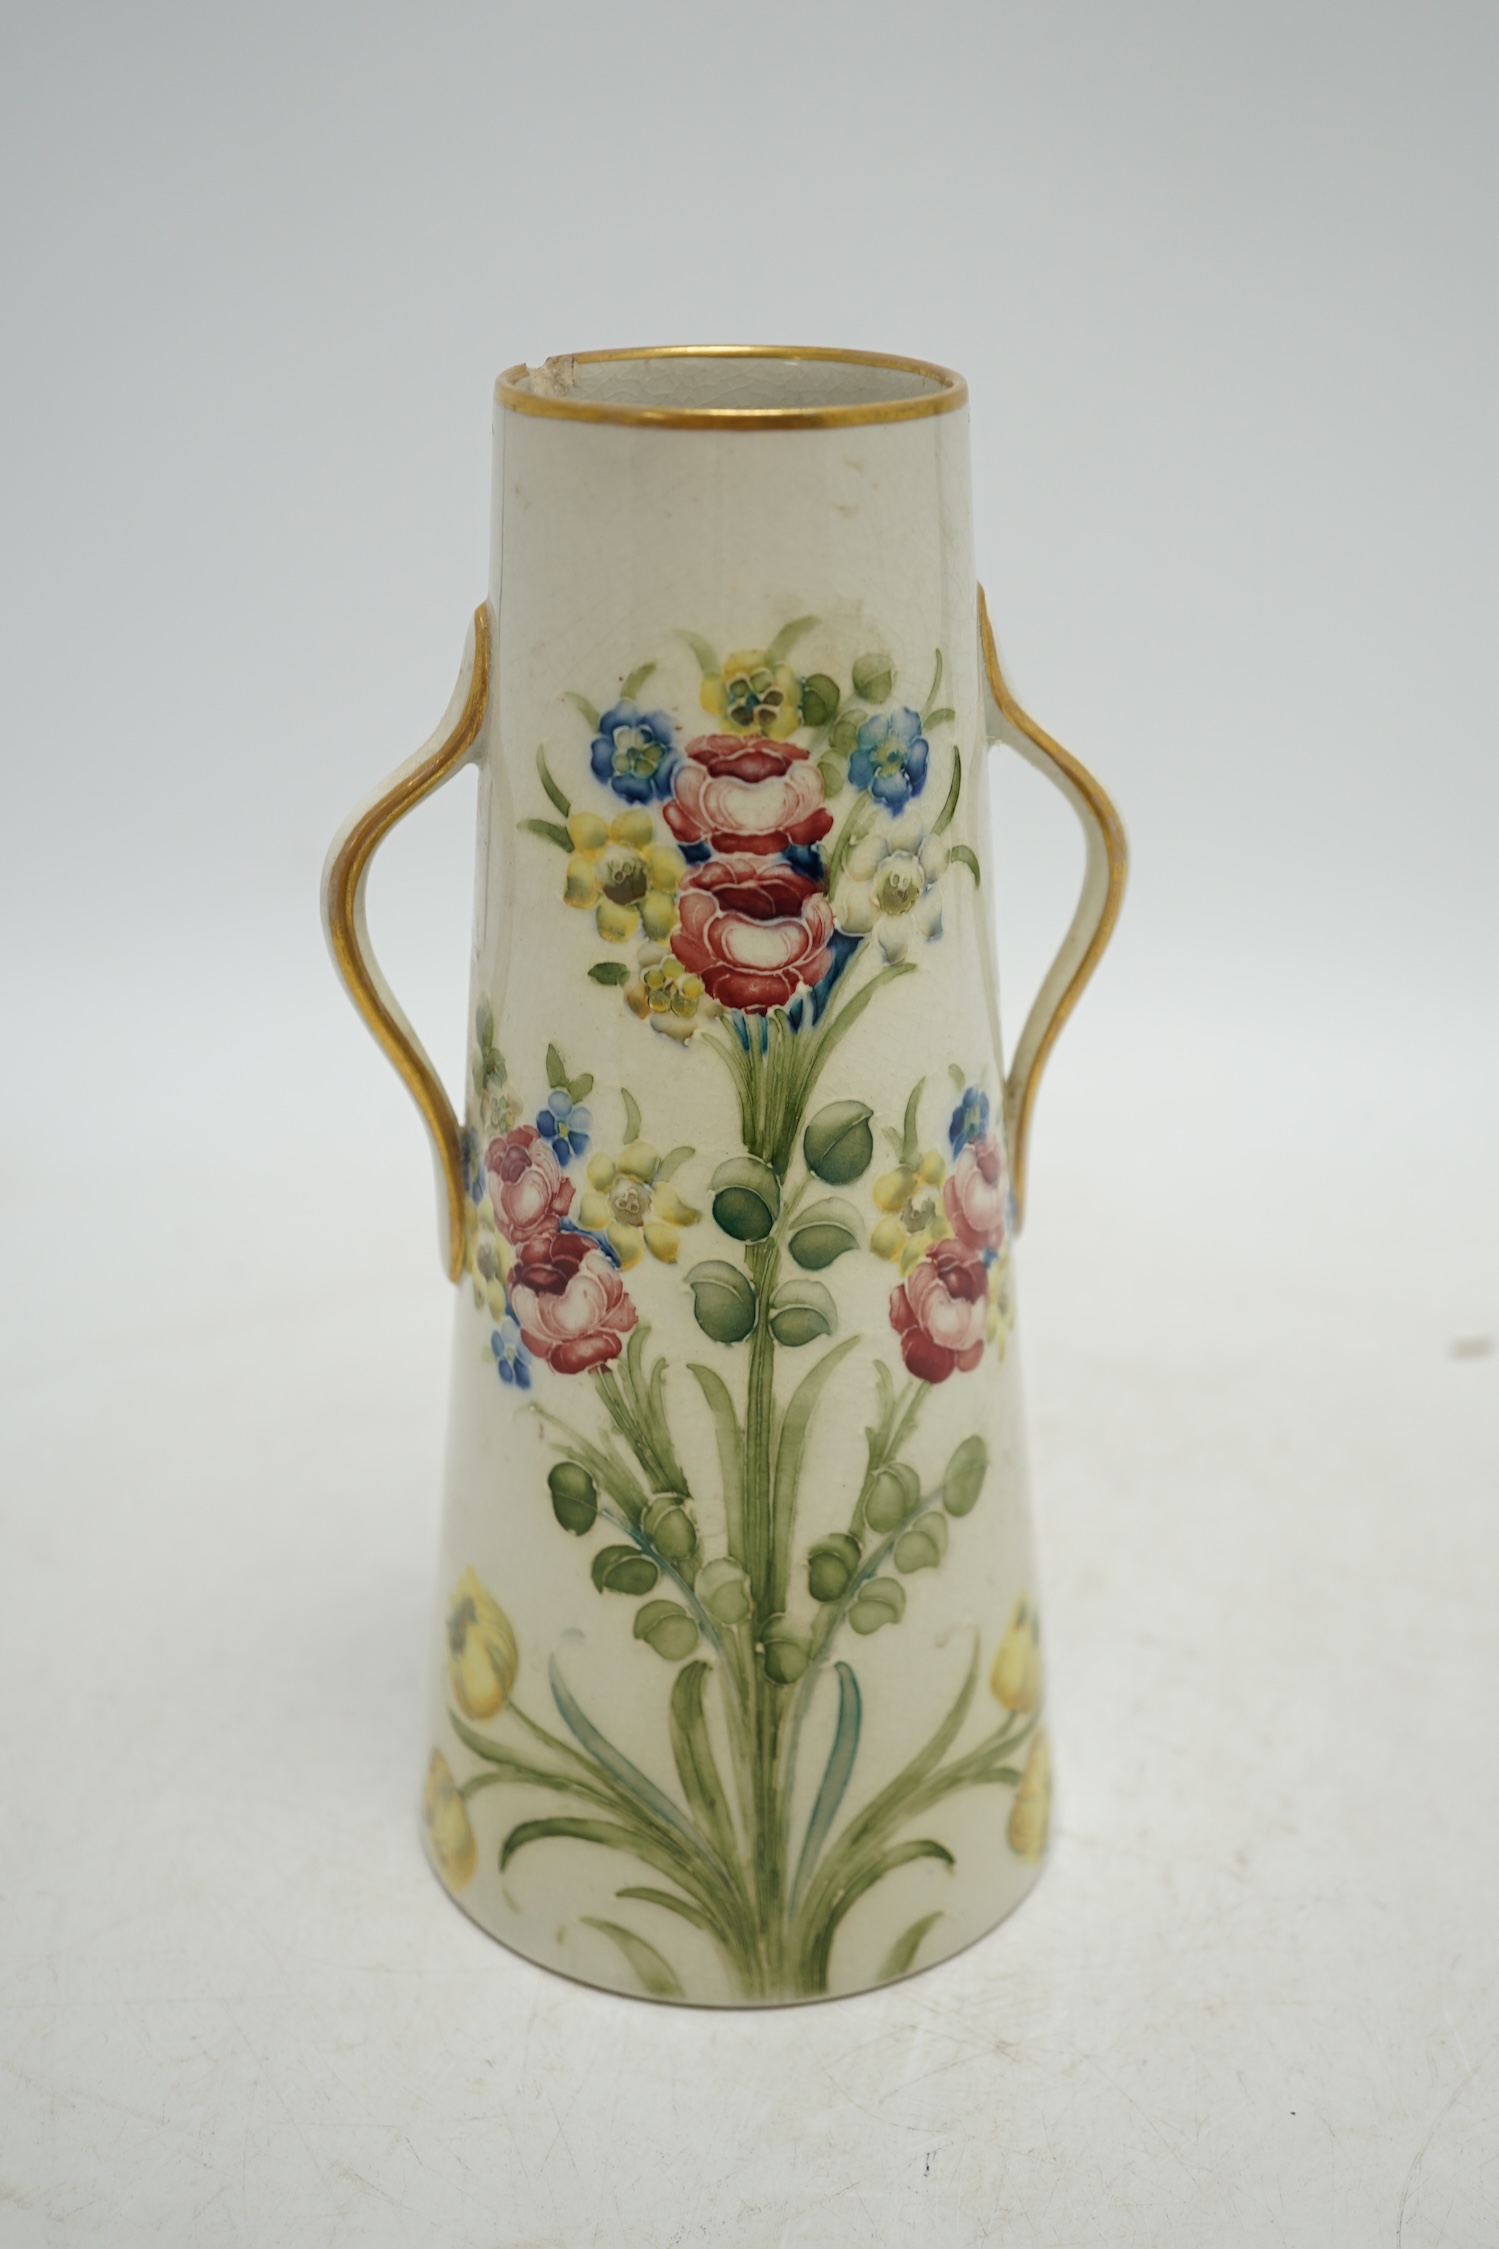 A Moorcroft for McIntyre Florian Ware two handled vase, circa 1905, height 20cm. Condition - large chip and crack to top rim